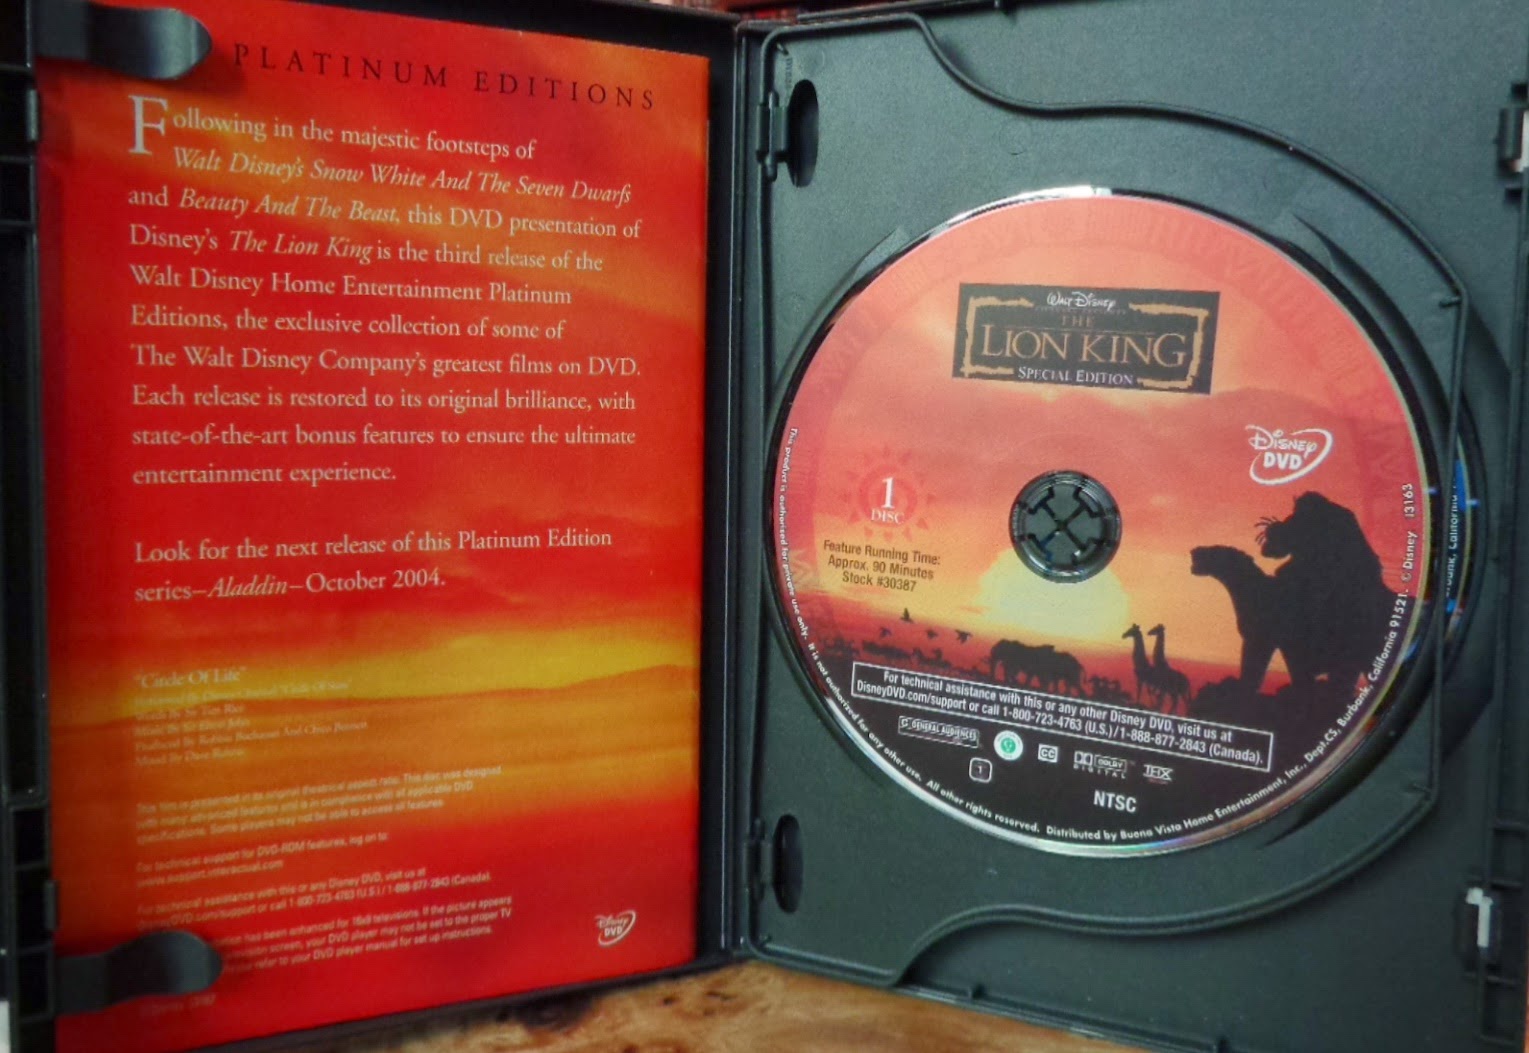 Movies on DVD and Blu-ray: The Lion King (1994)